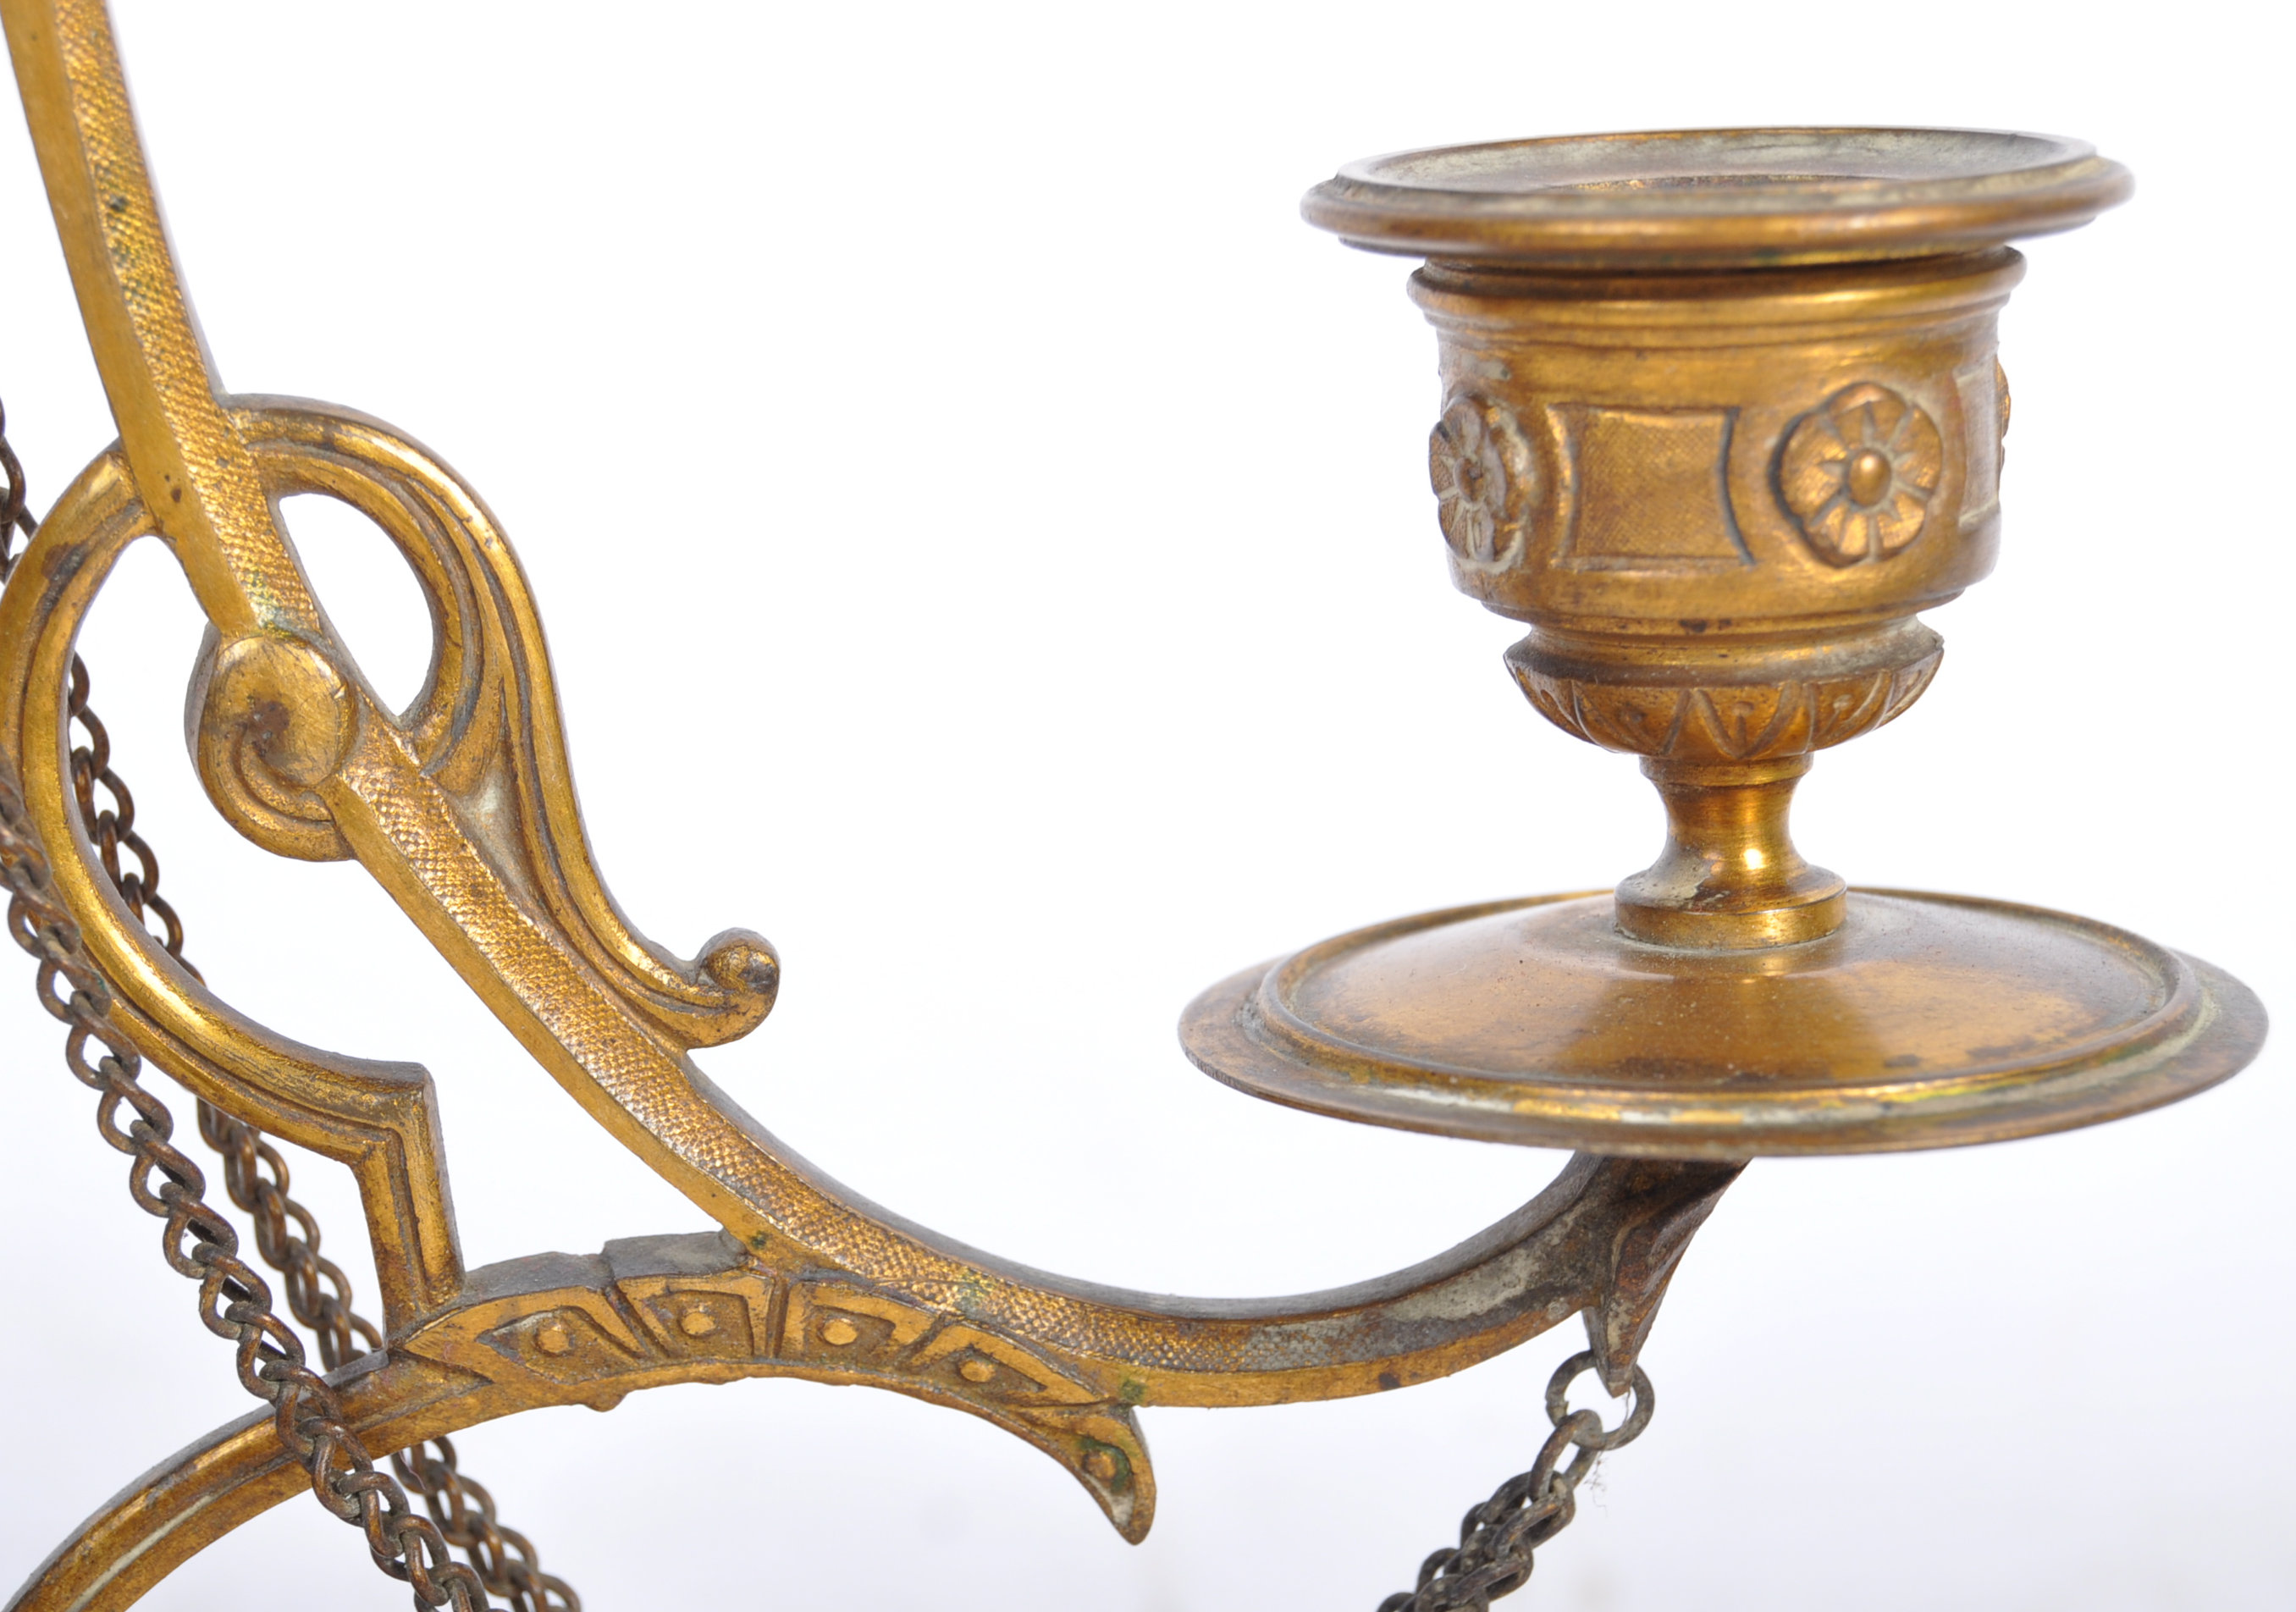 PAIR OF 19TH CENTURY BRONZE AND MARBLE CANDLESTICKS - Image 5 of 8